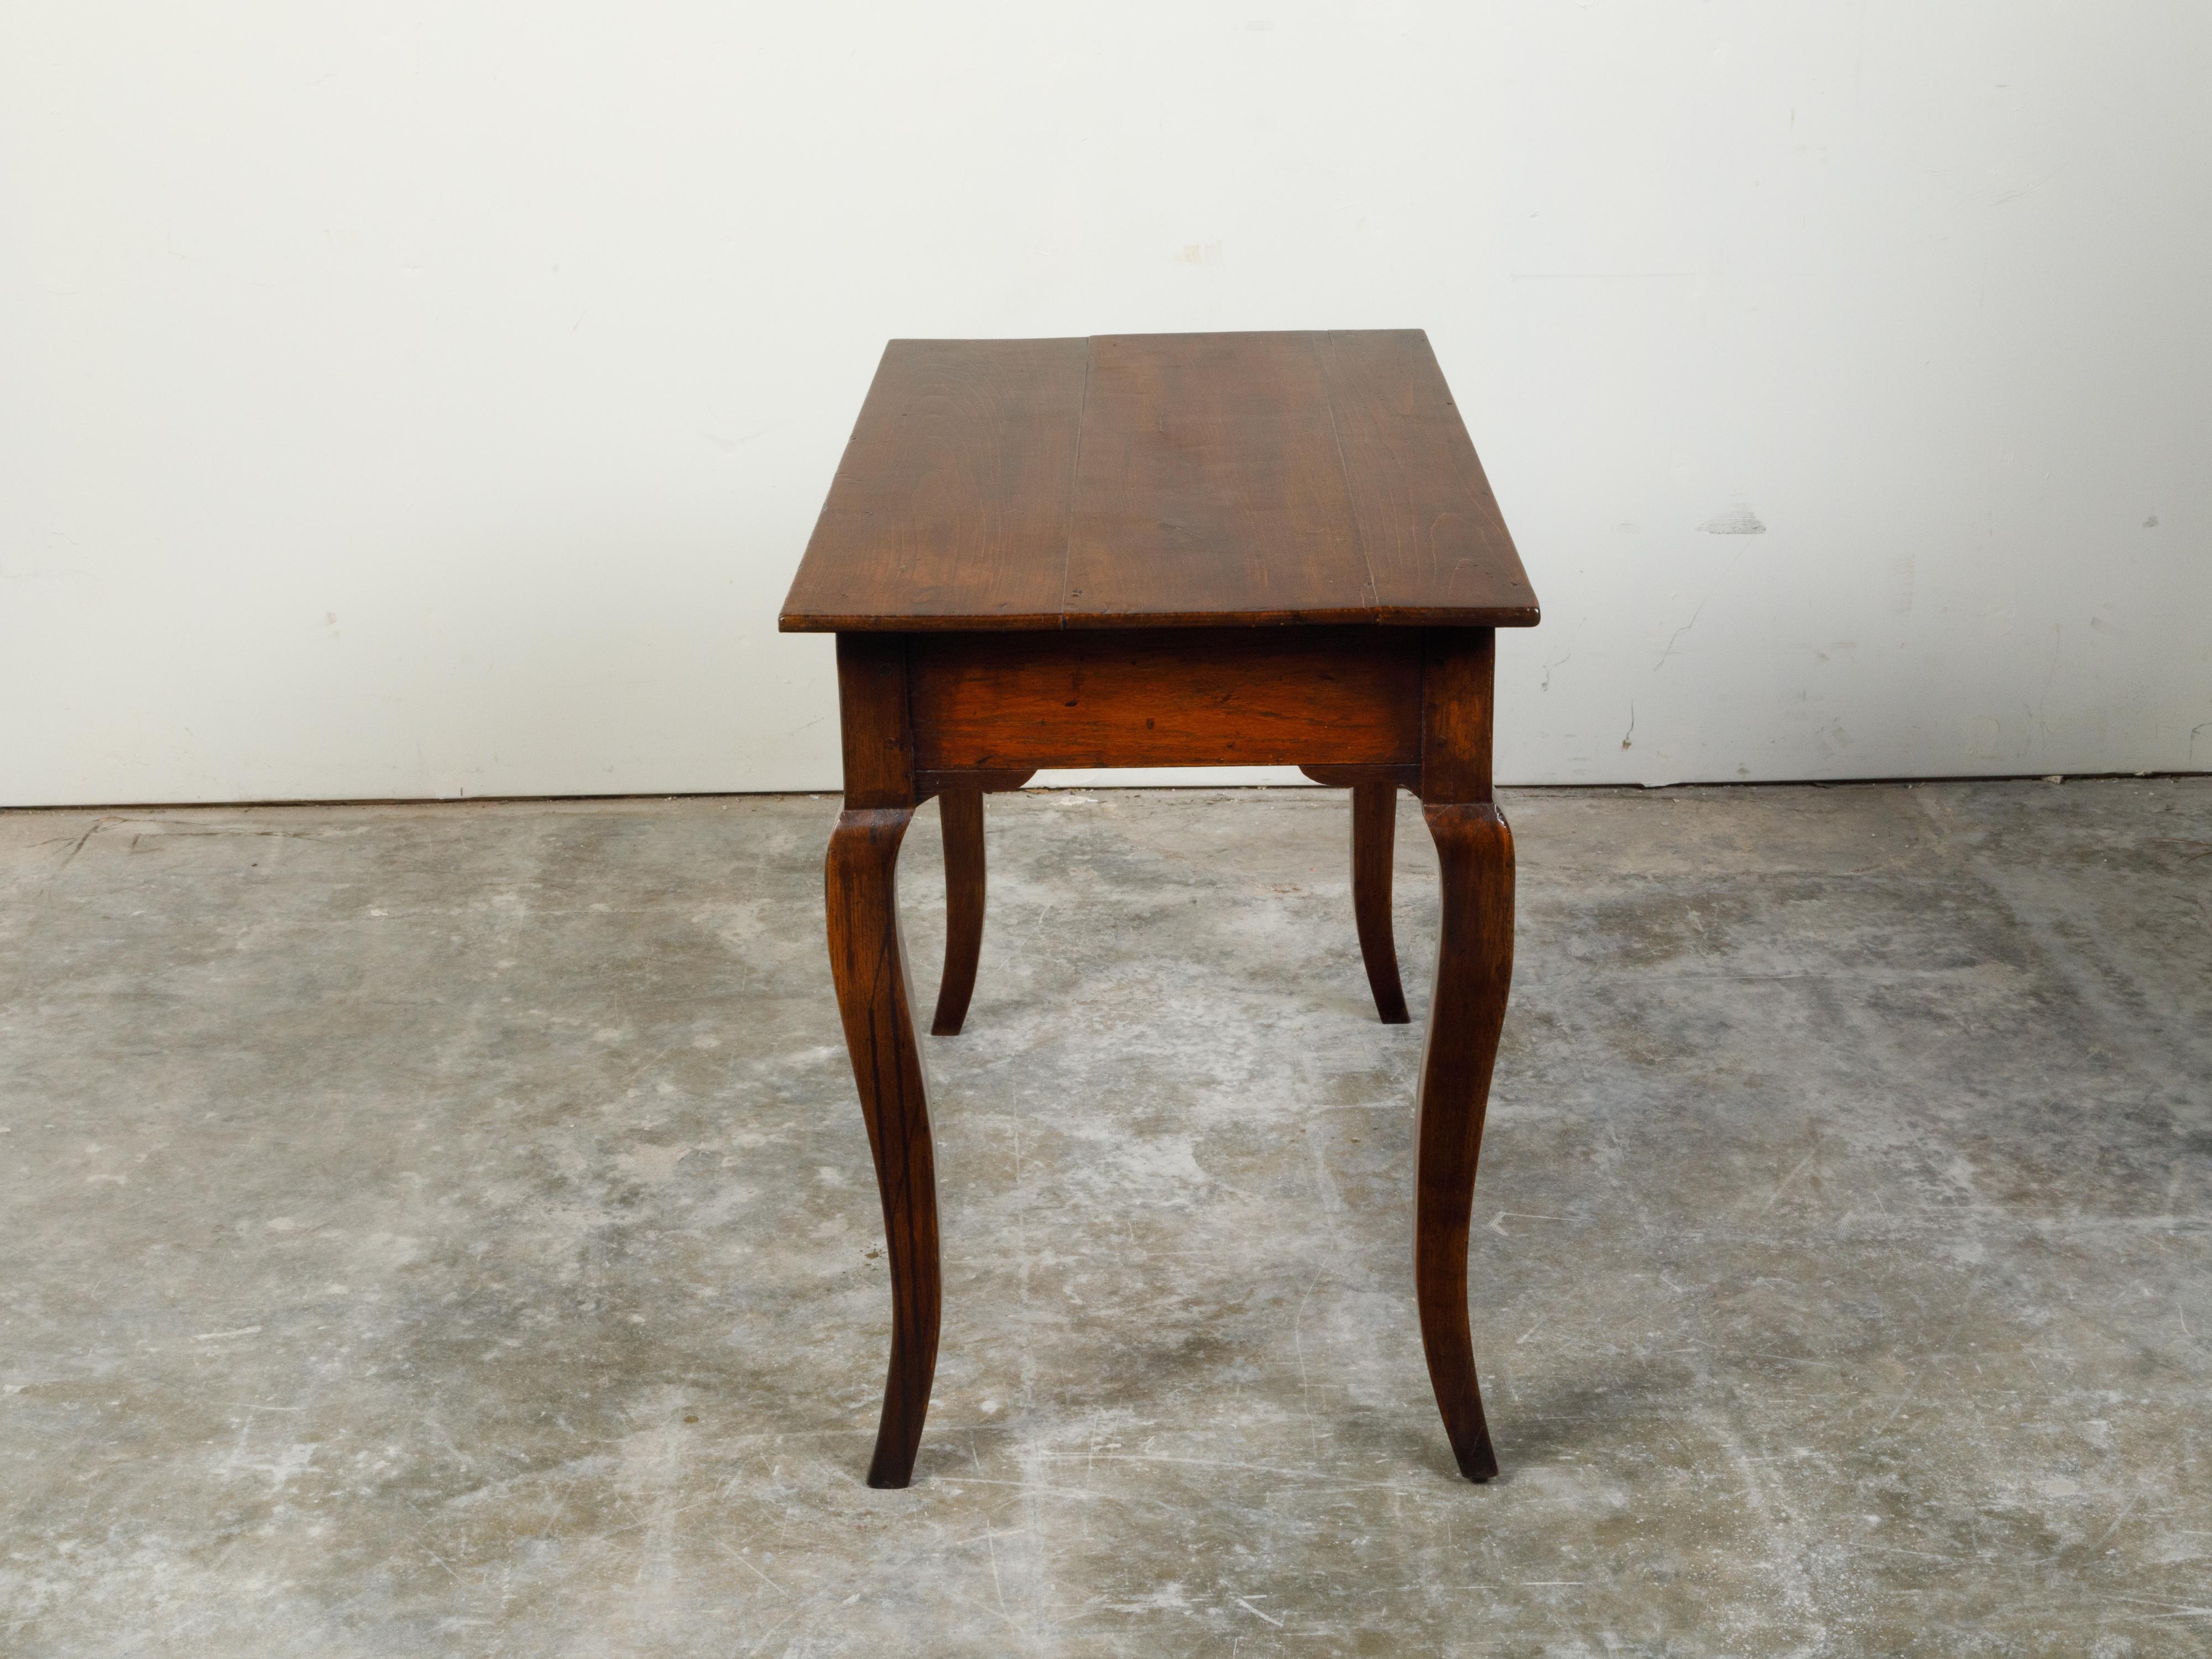 French Louis XV Style 19th Century Walnut Desk with Drawers and Cabriole Legs For Sale 1